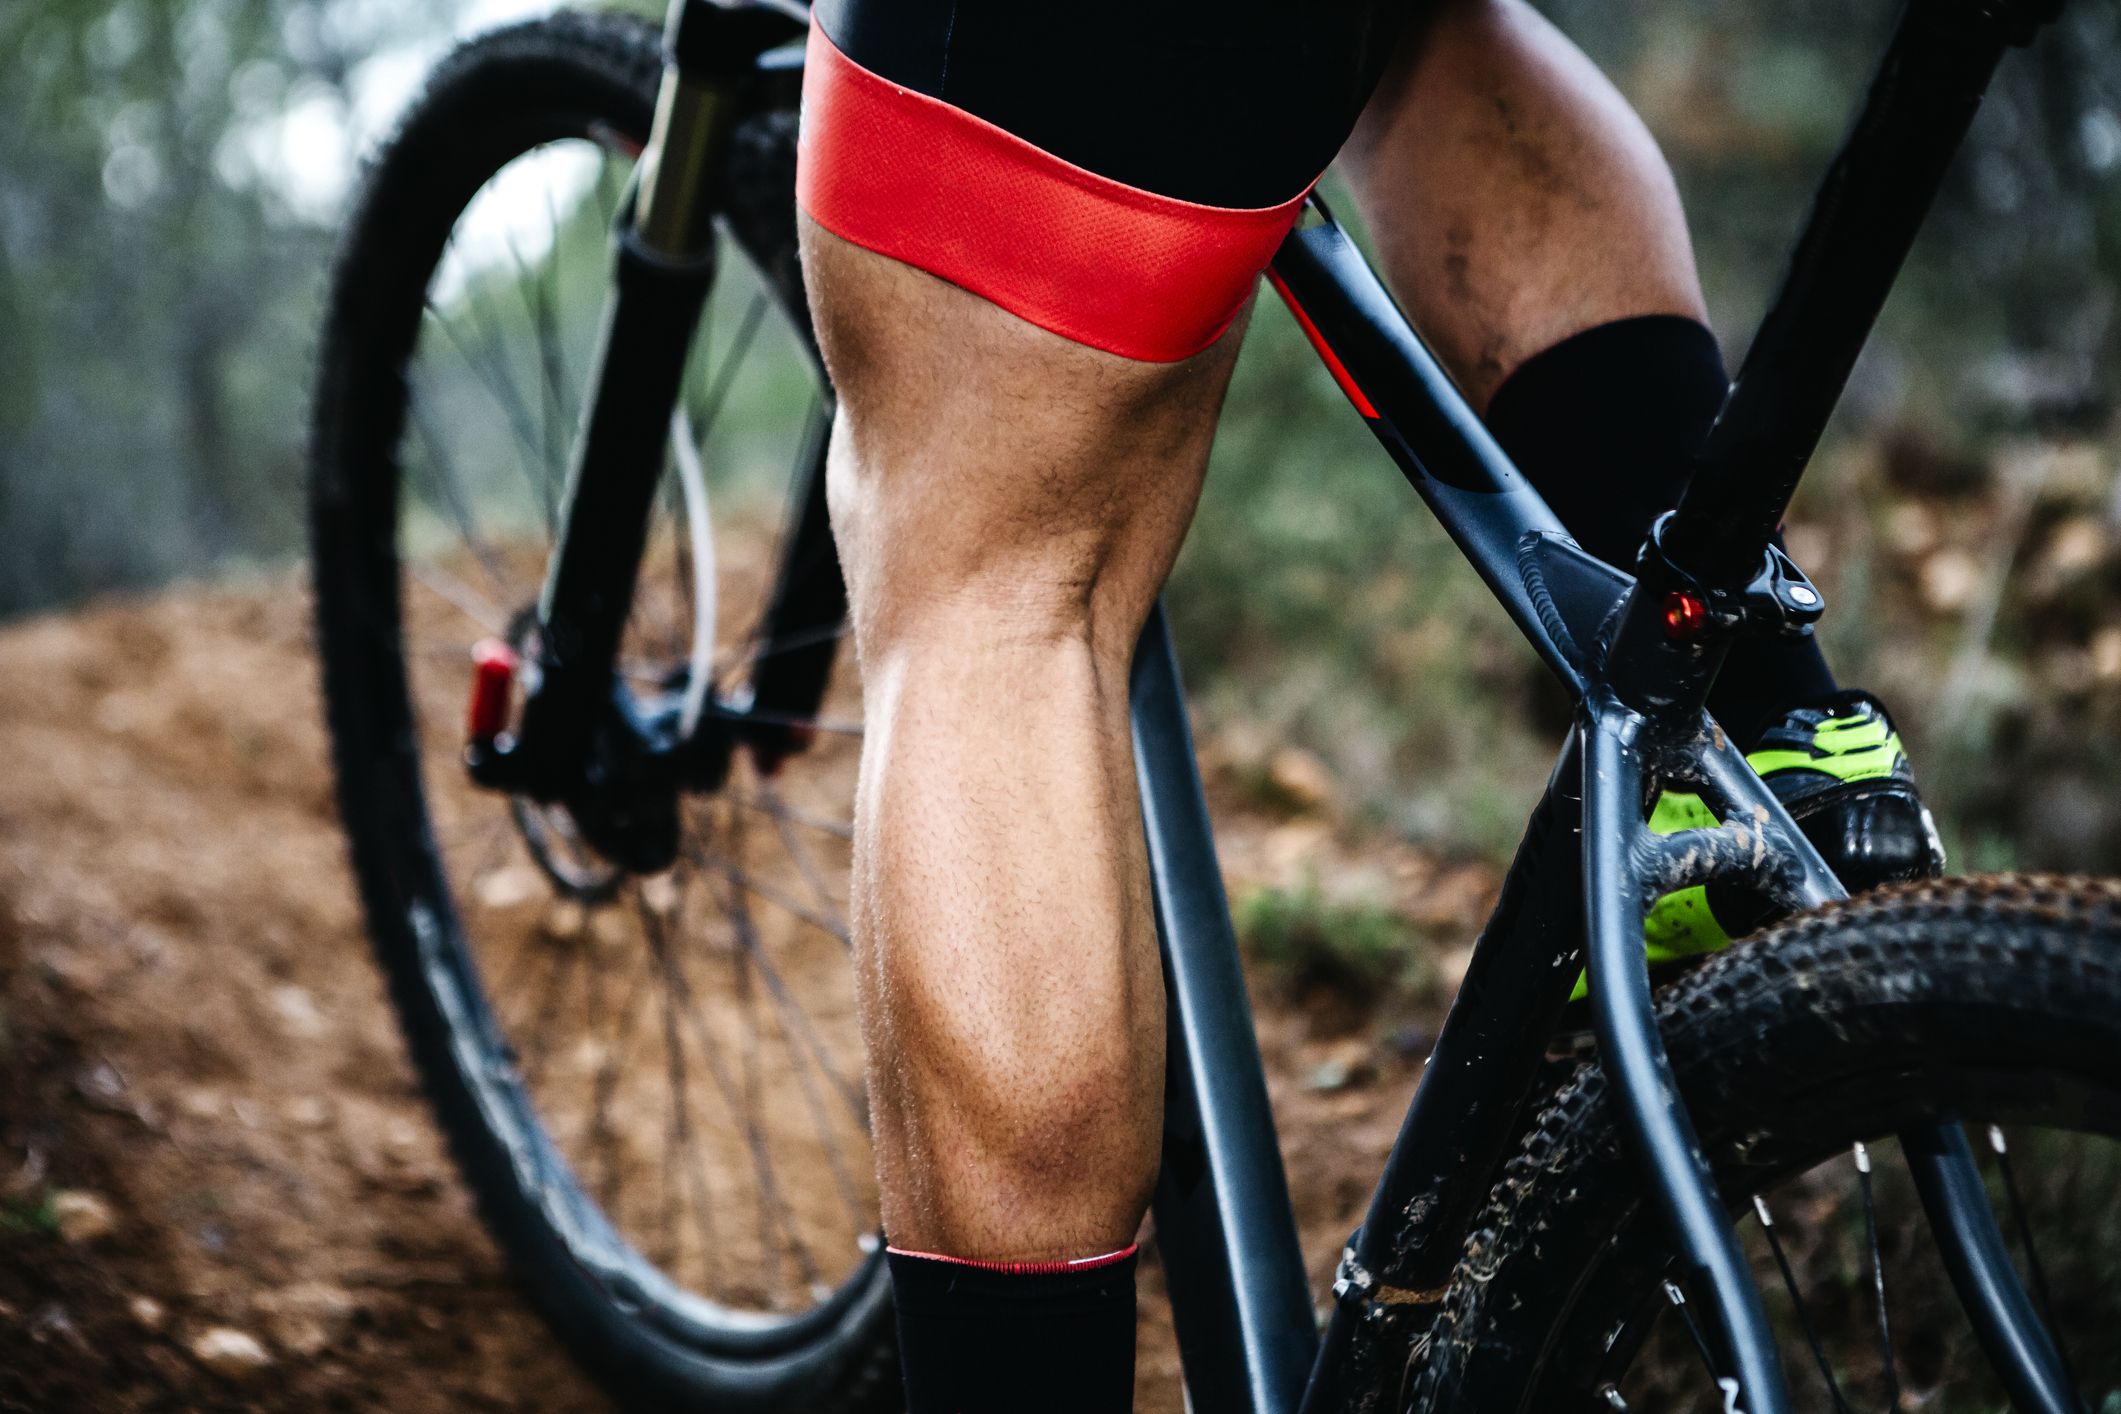 The Best Cycling Leg Workouts and Leg Exercises to Build Power